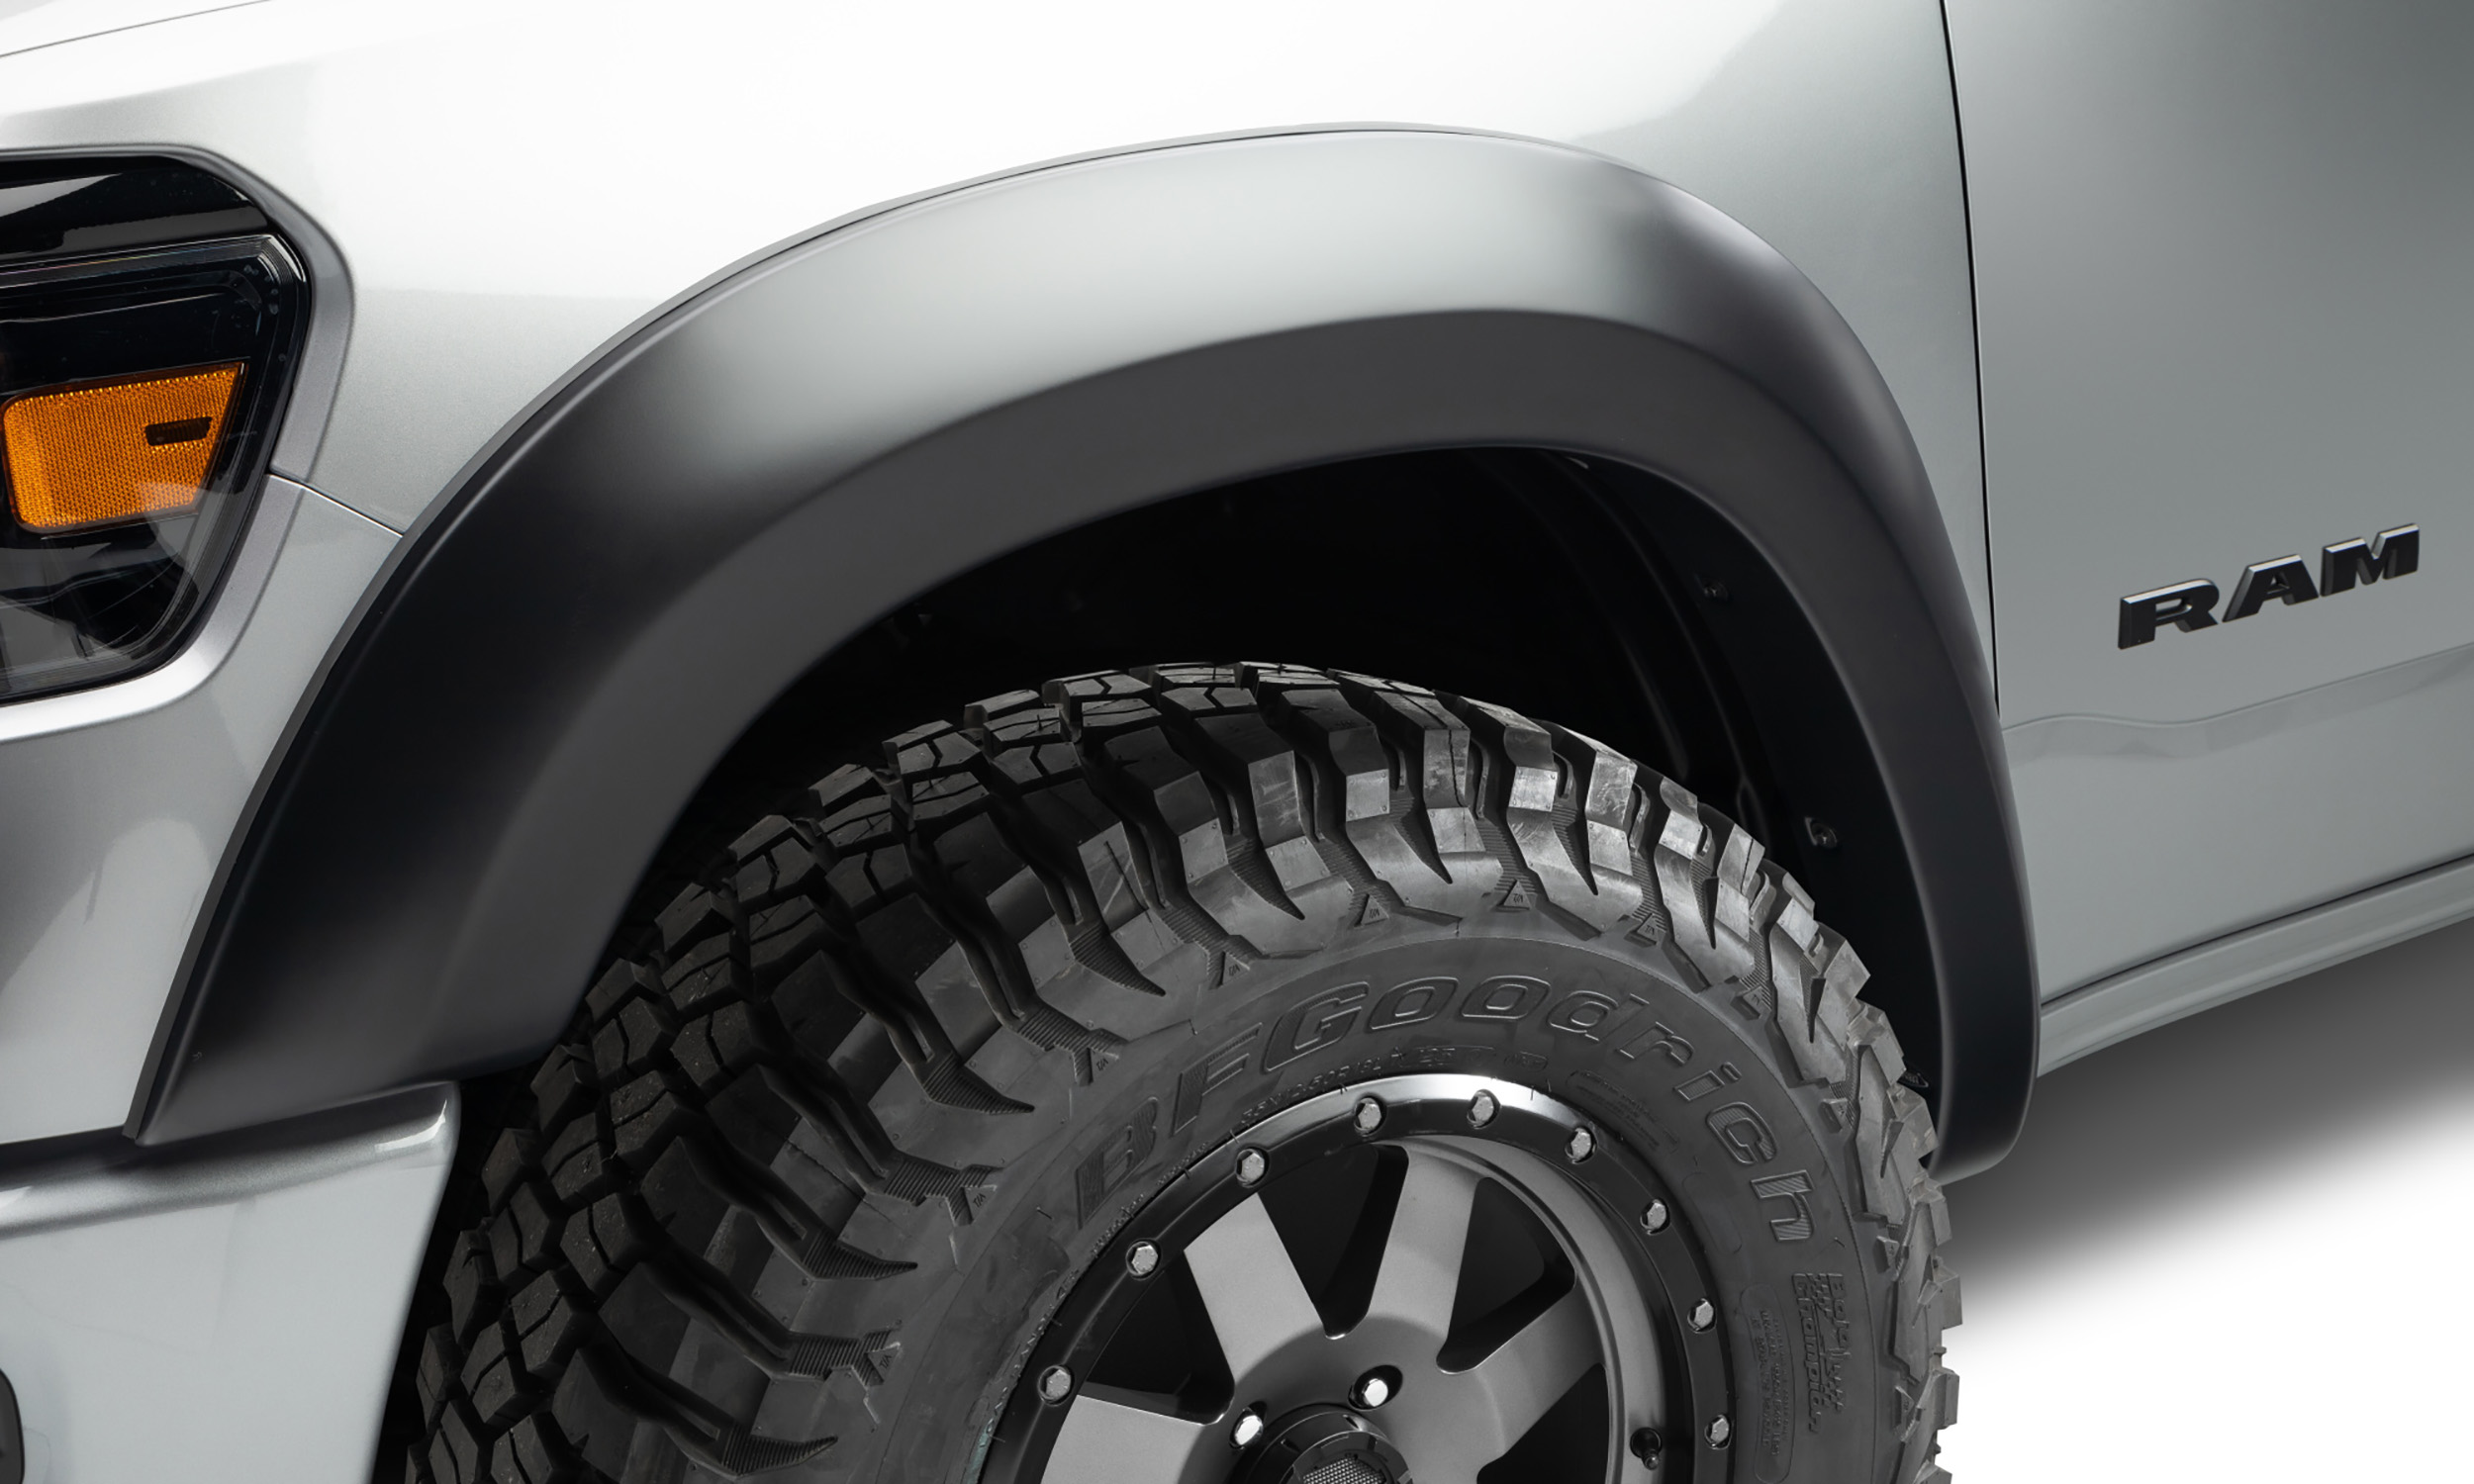 Bushwacker 50055-02 Black Extend-A-Fender Style Smooth Finish Front Fender Flares for 2019-2022 Ram 1500; Will not fit Rebel and TRX models